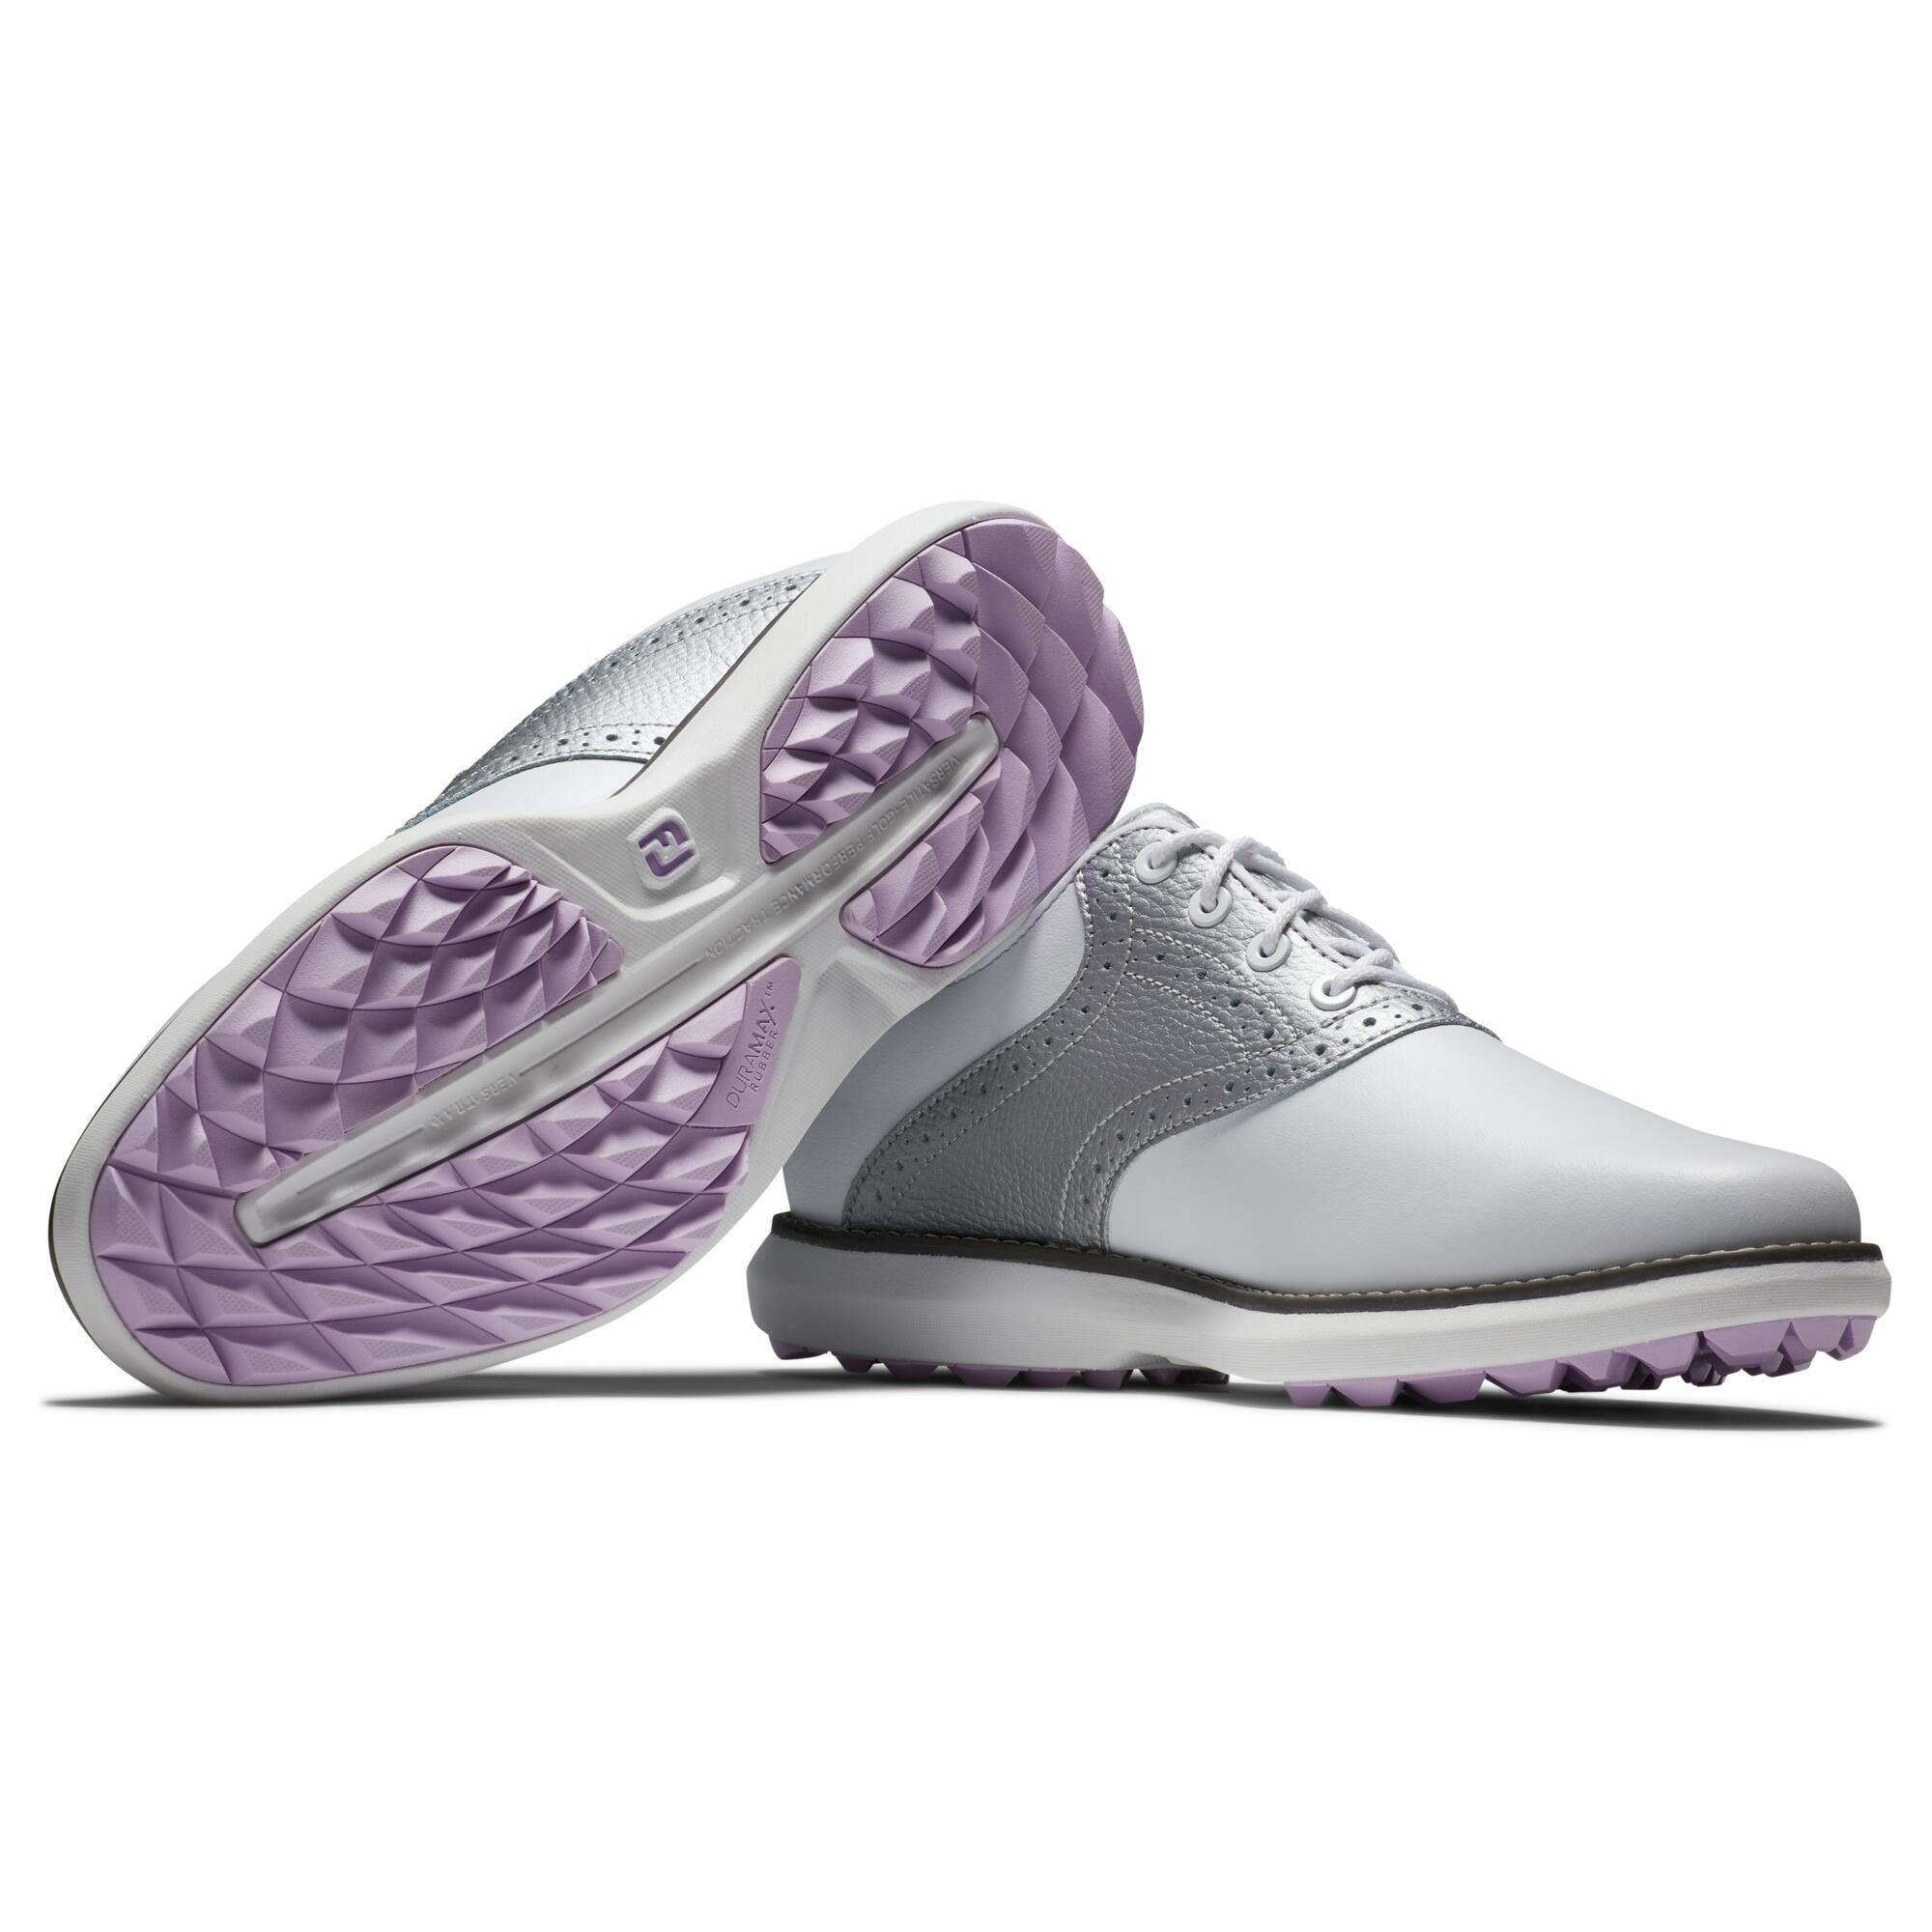 WOMEN'S WATERPROOF GOLF SHOES FJ TRADITION - WHITE AND SILVER 6/6